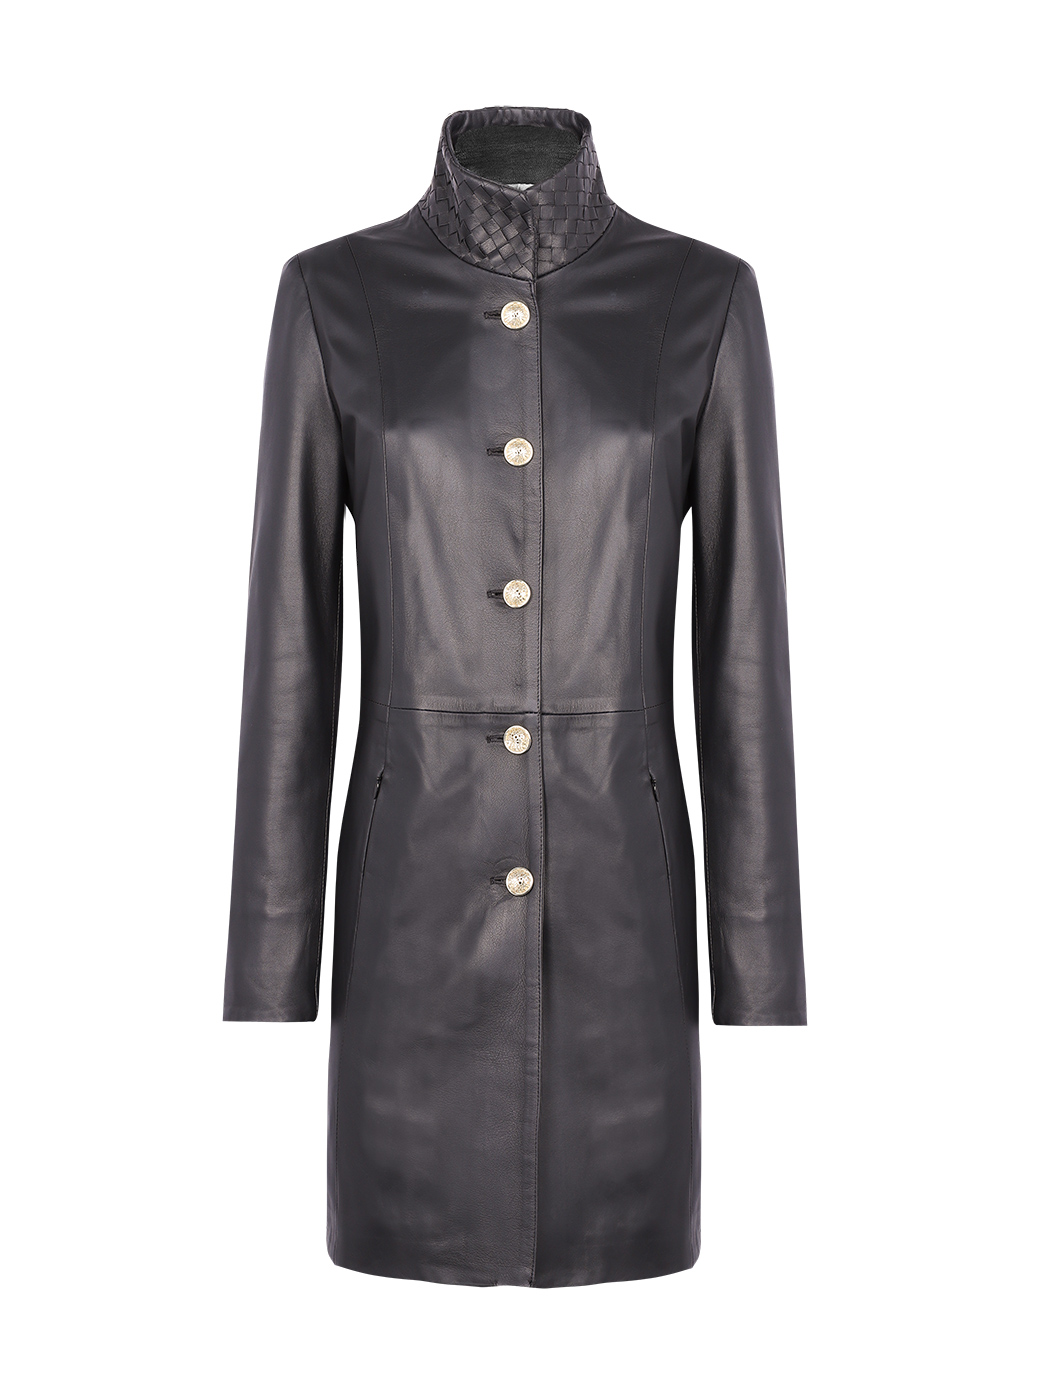 Leather trench coat with braided collar